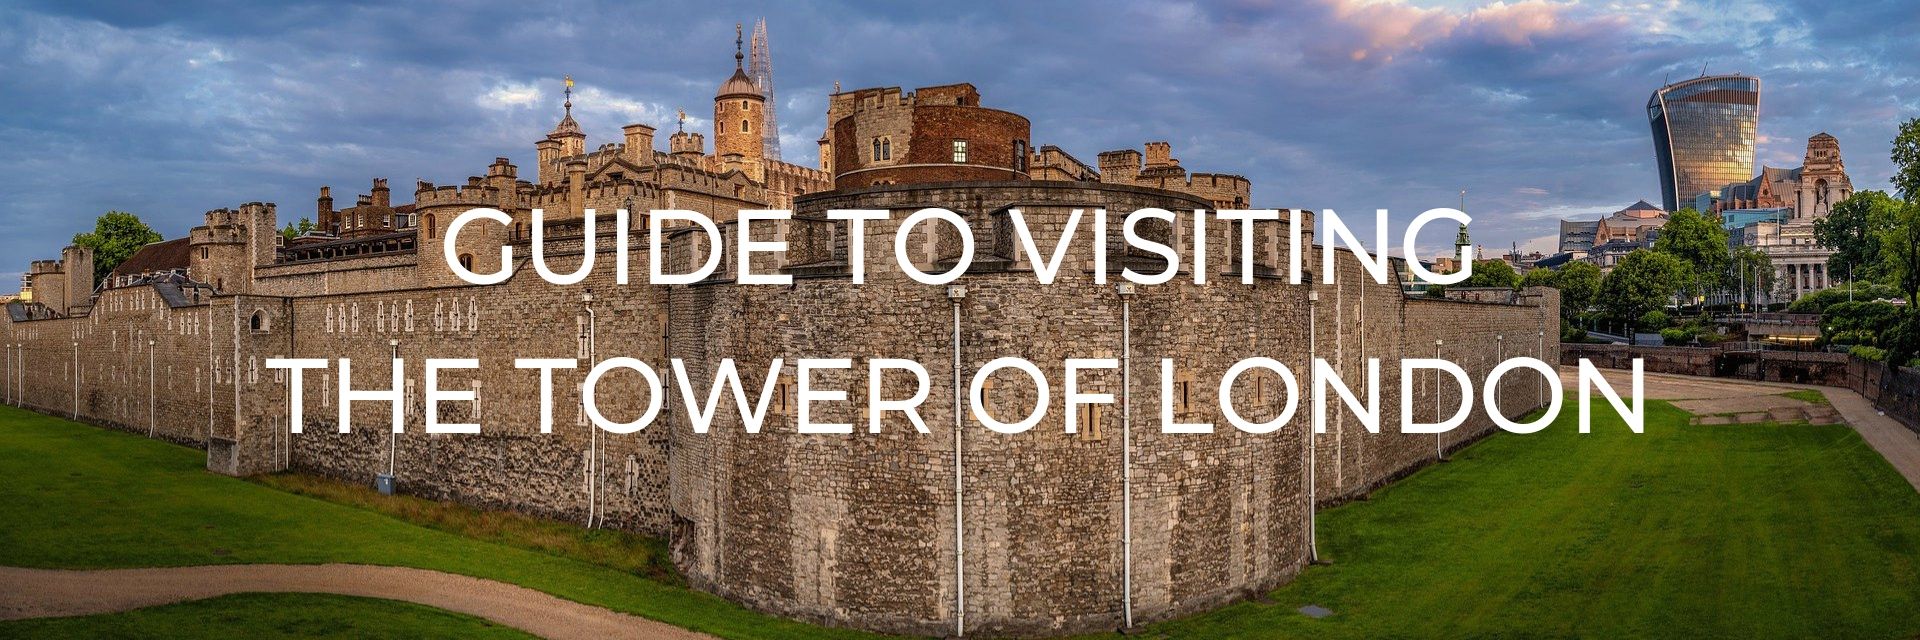 Tower of London, UK